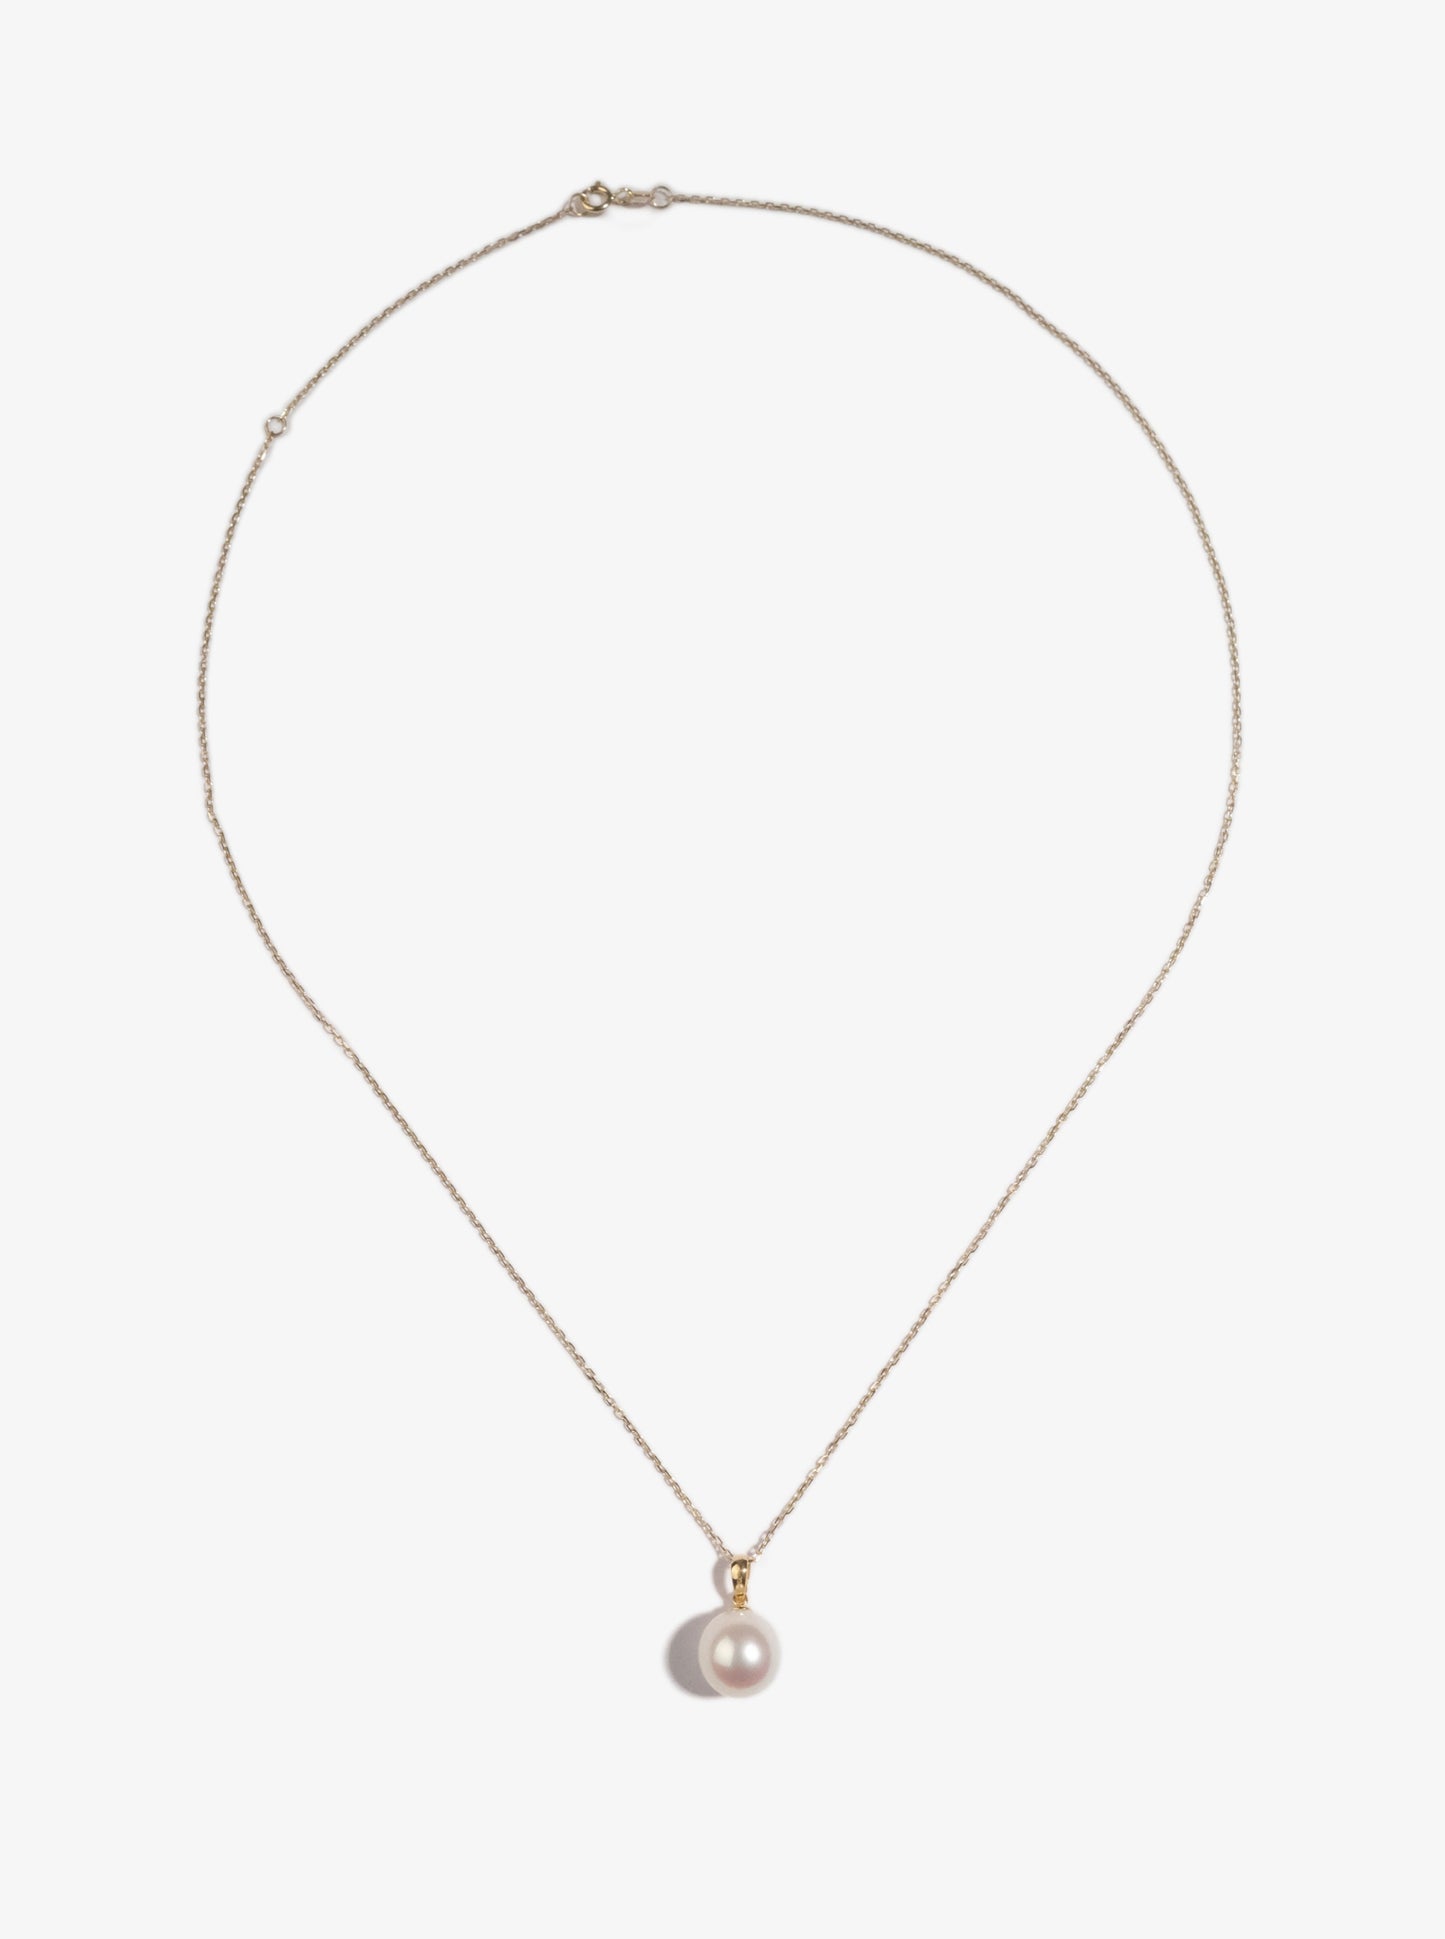 Freshwater Pearl Pendant With 18K Gold FP18K37